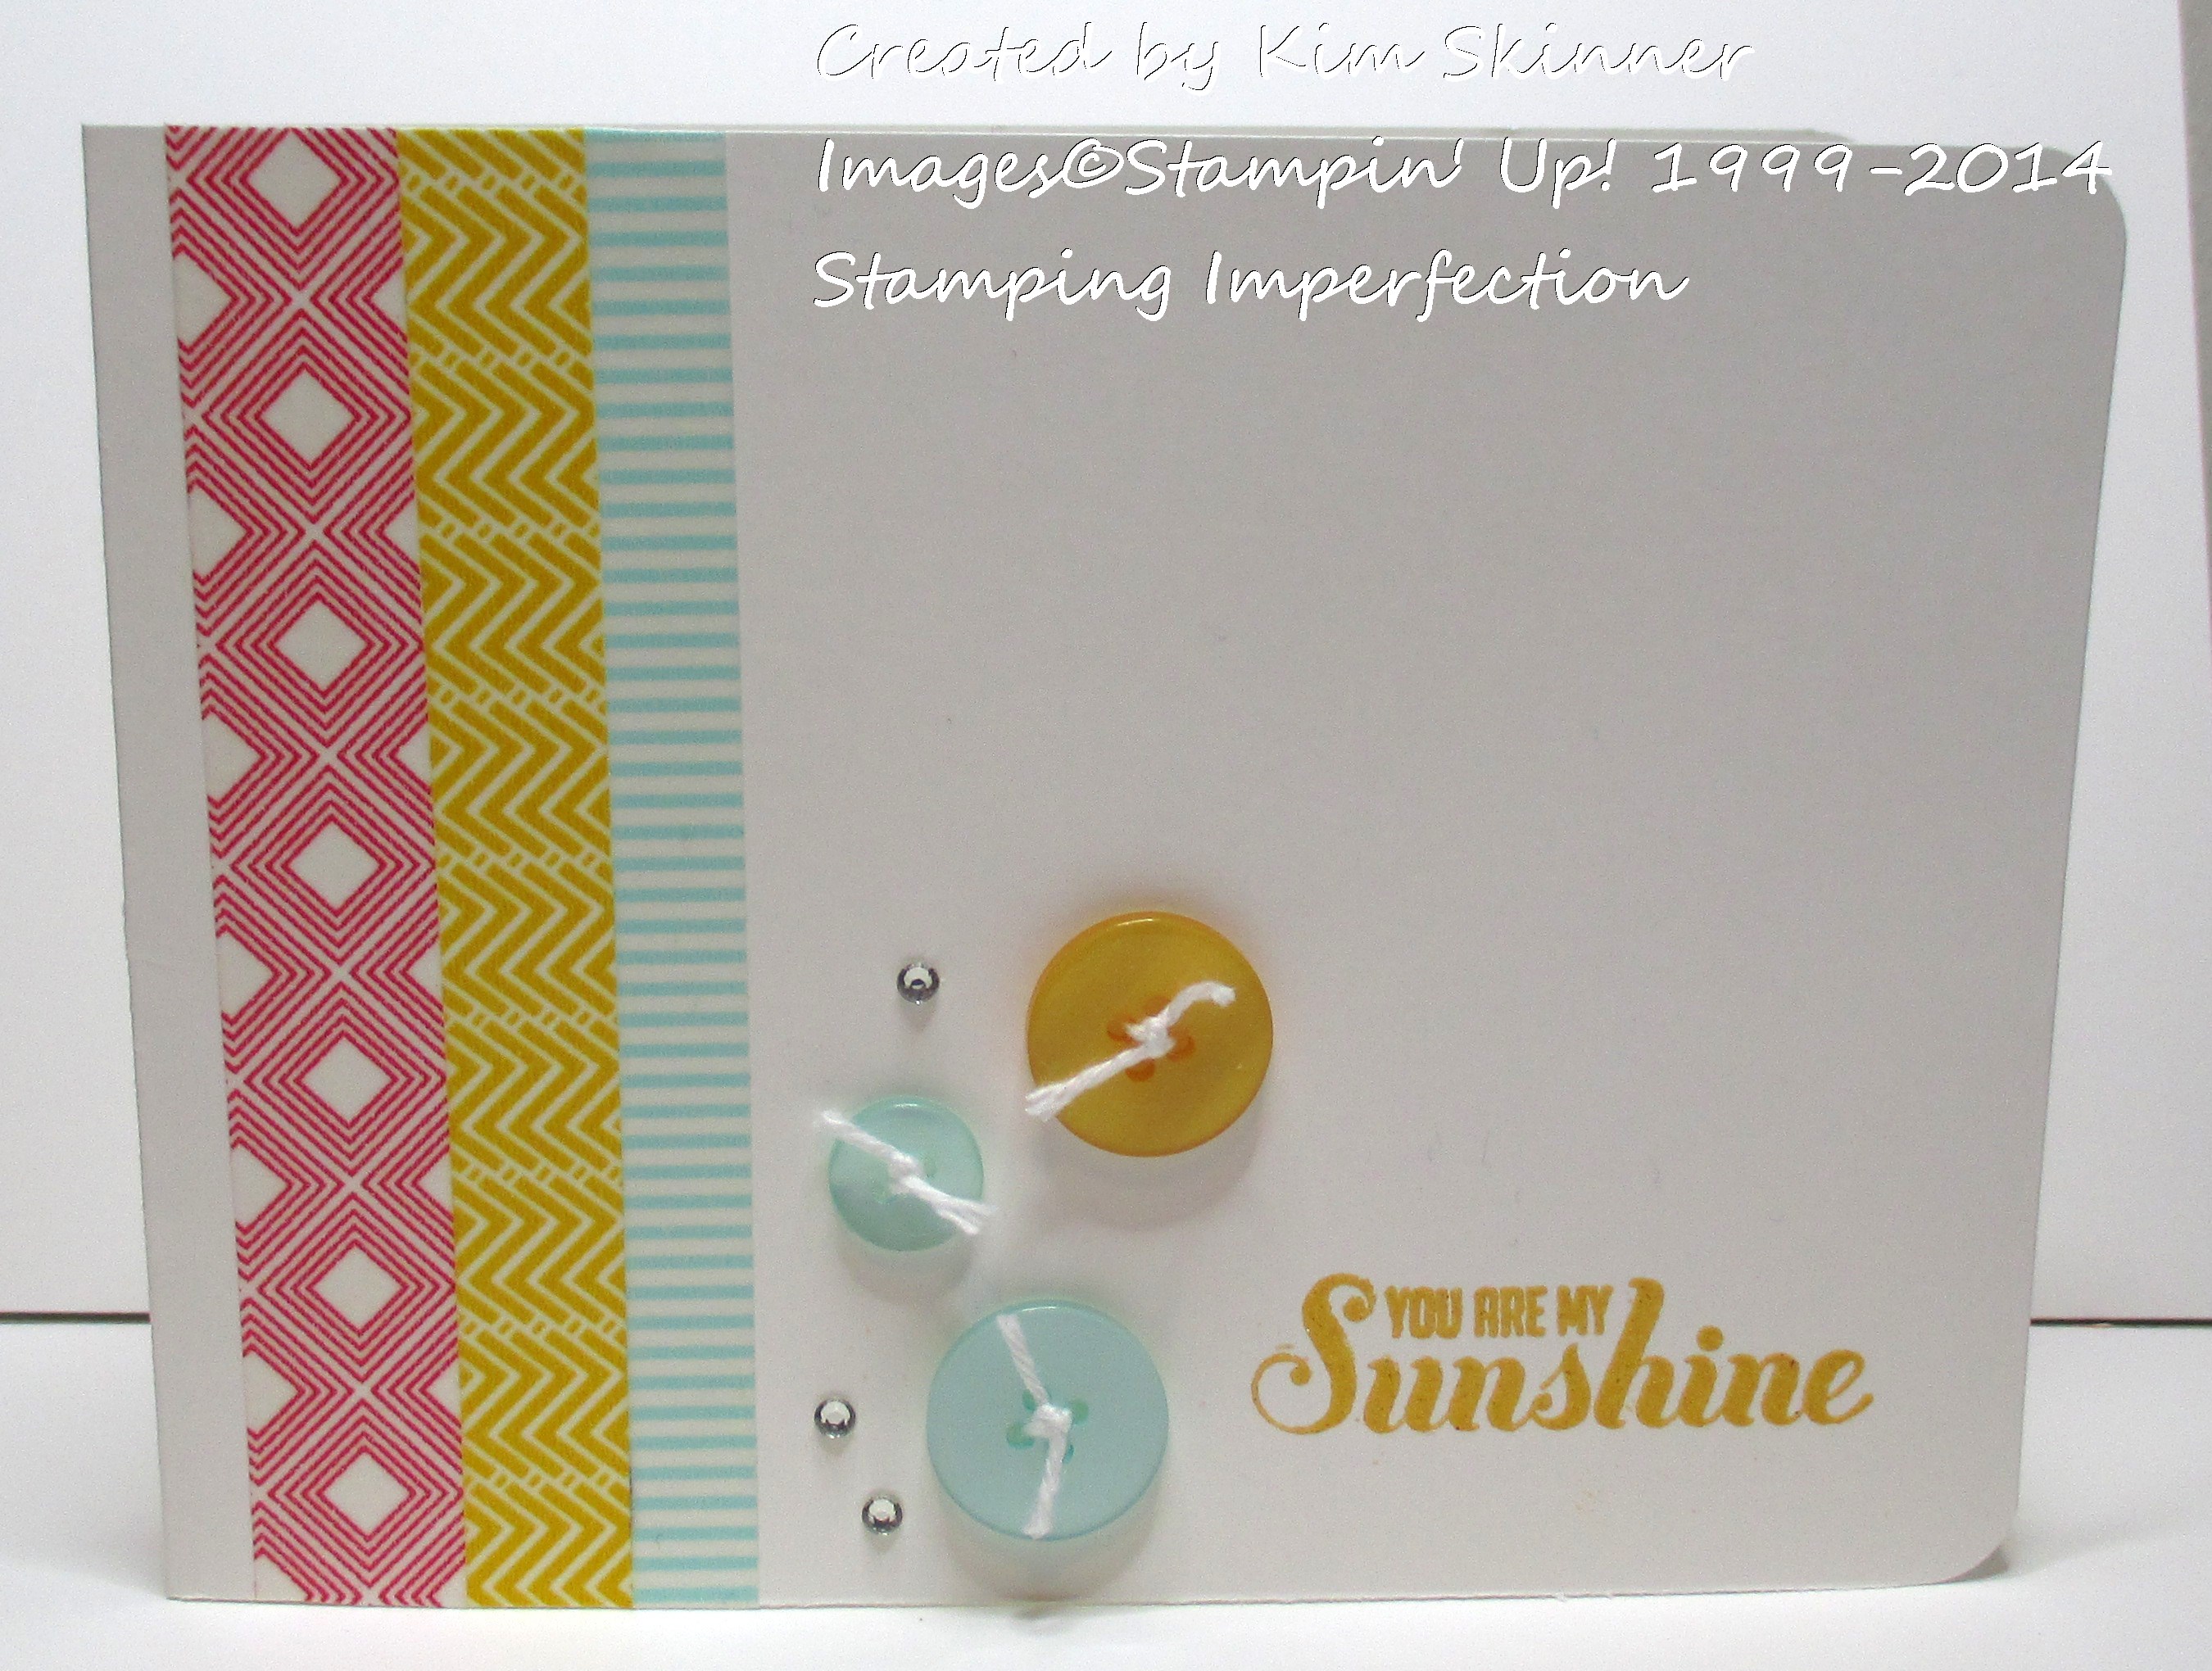 Stamping Imperfection Quick Washi Tape Card